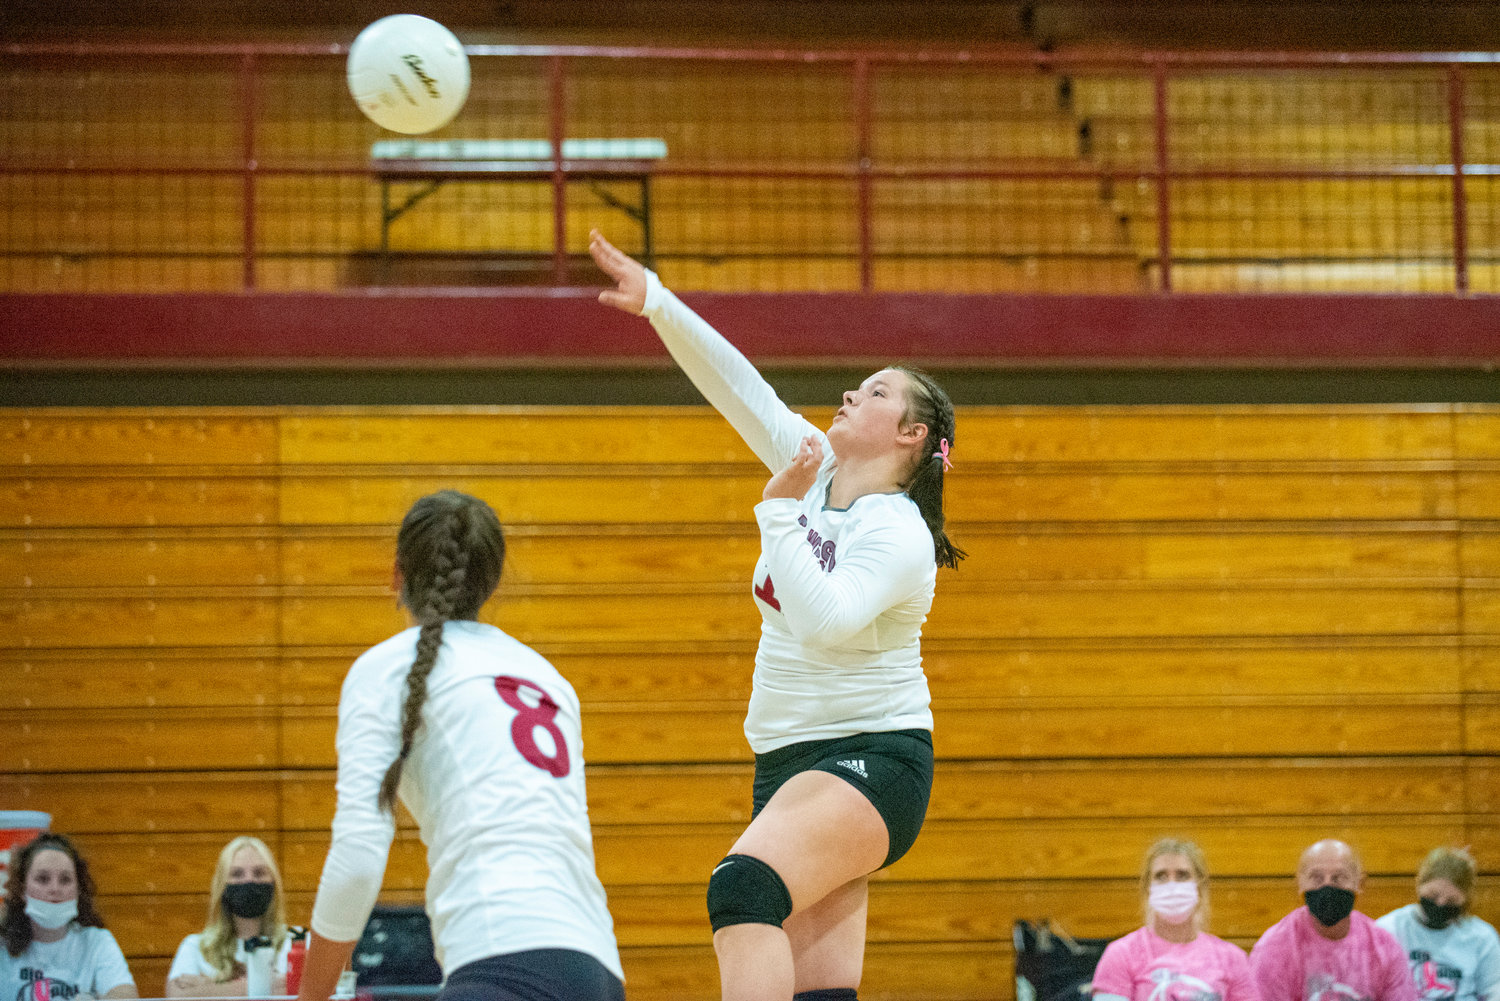 W.F. West's Savannah Hawkins (11) leaps for a spike against Centralia on Oct. 12, 2021.